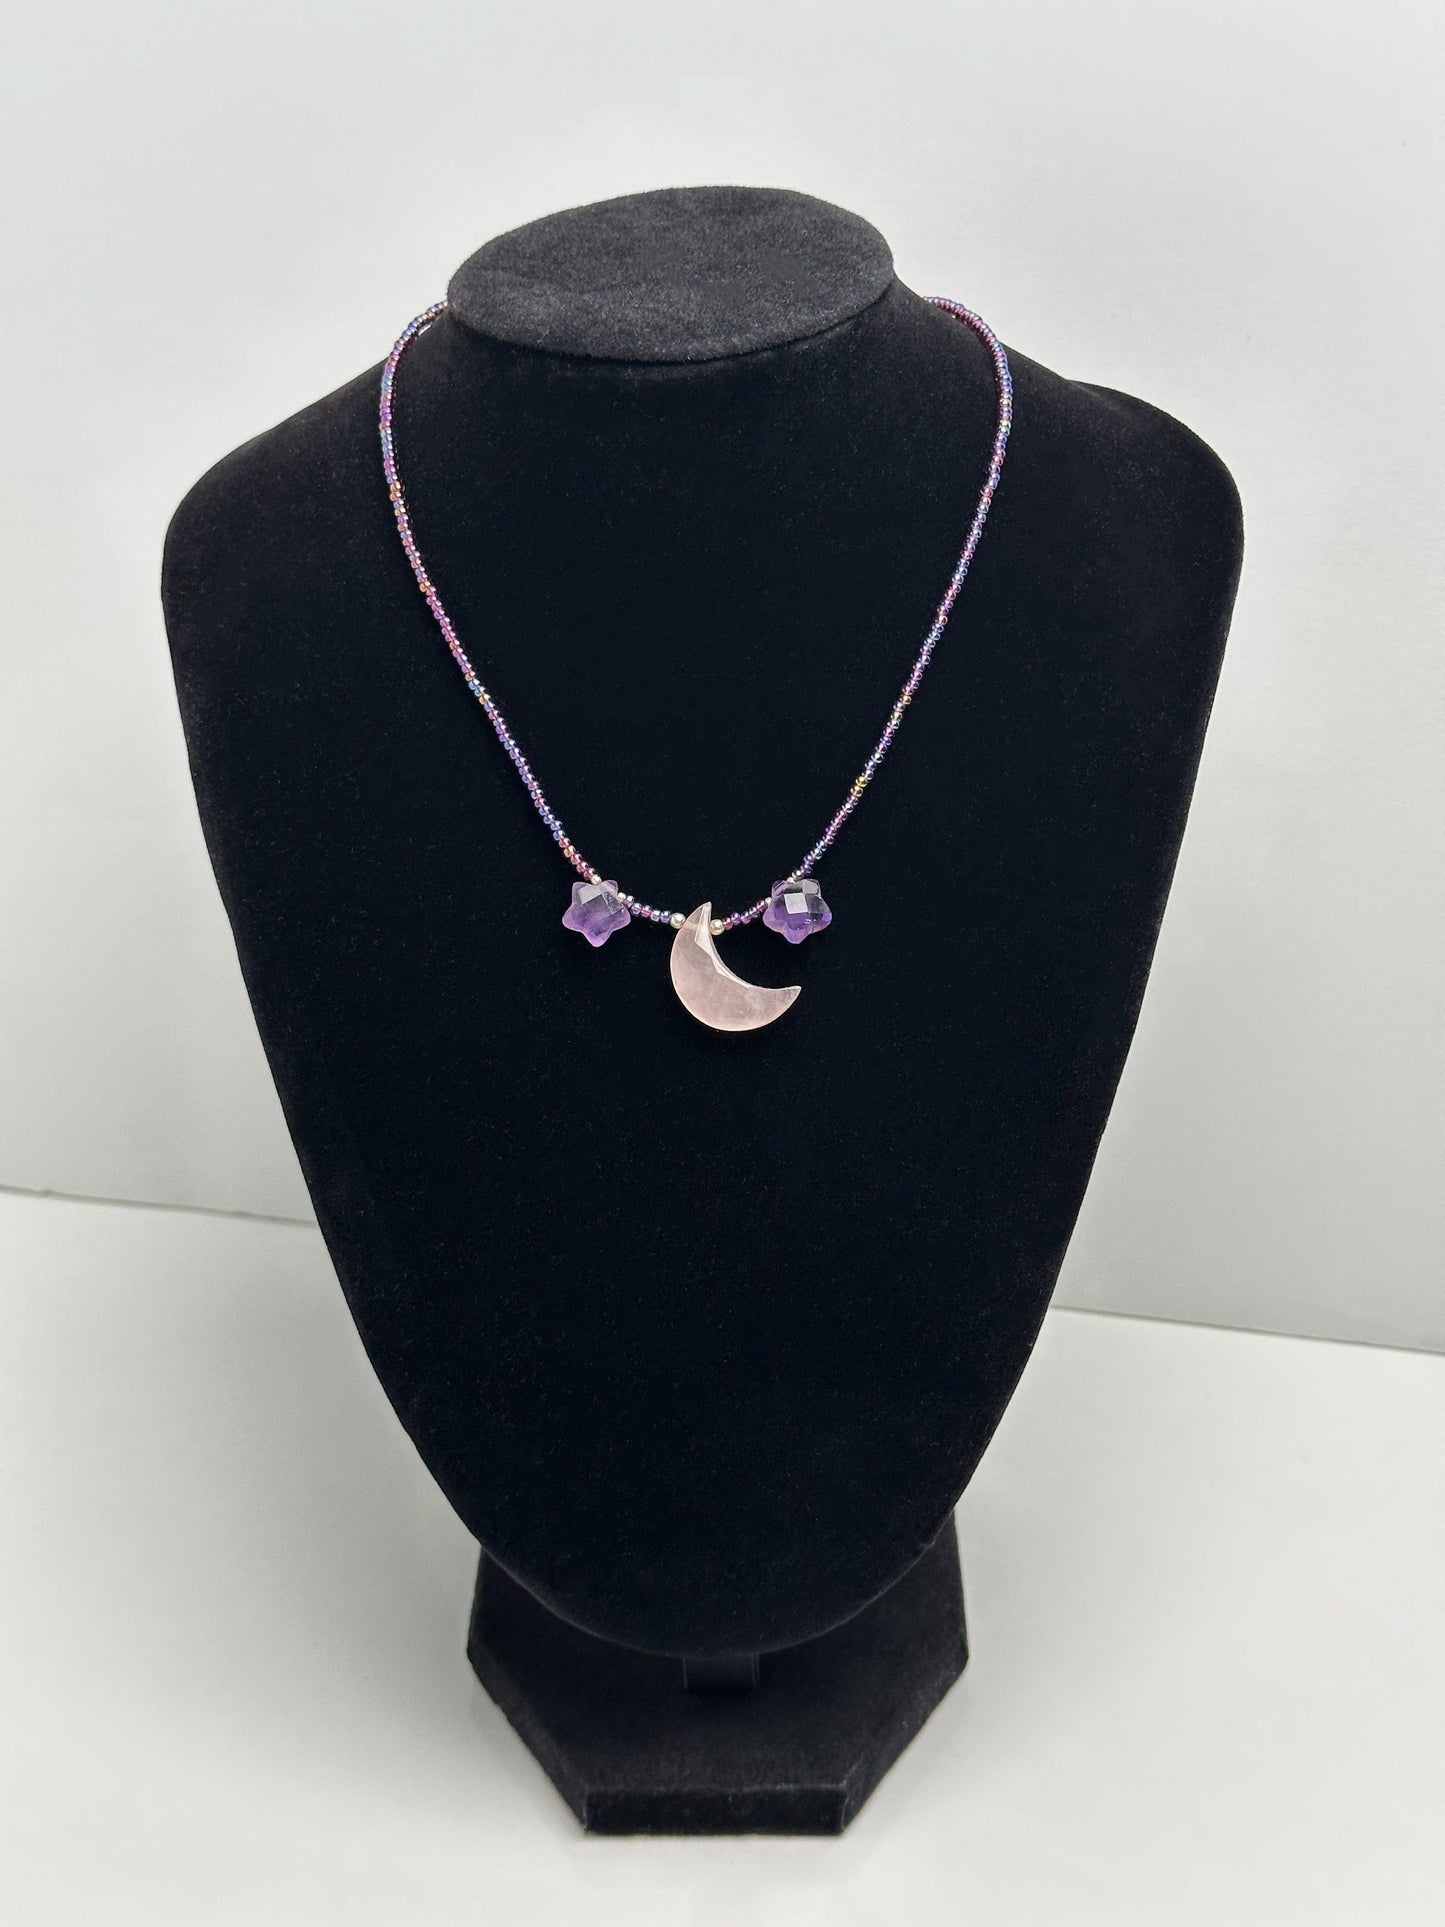 Ted & Bubs Necklaces Amethyst & Rose Quartz Night Sky Necklace - Crystal Sky Collection